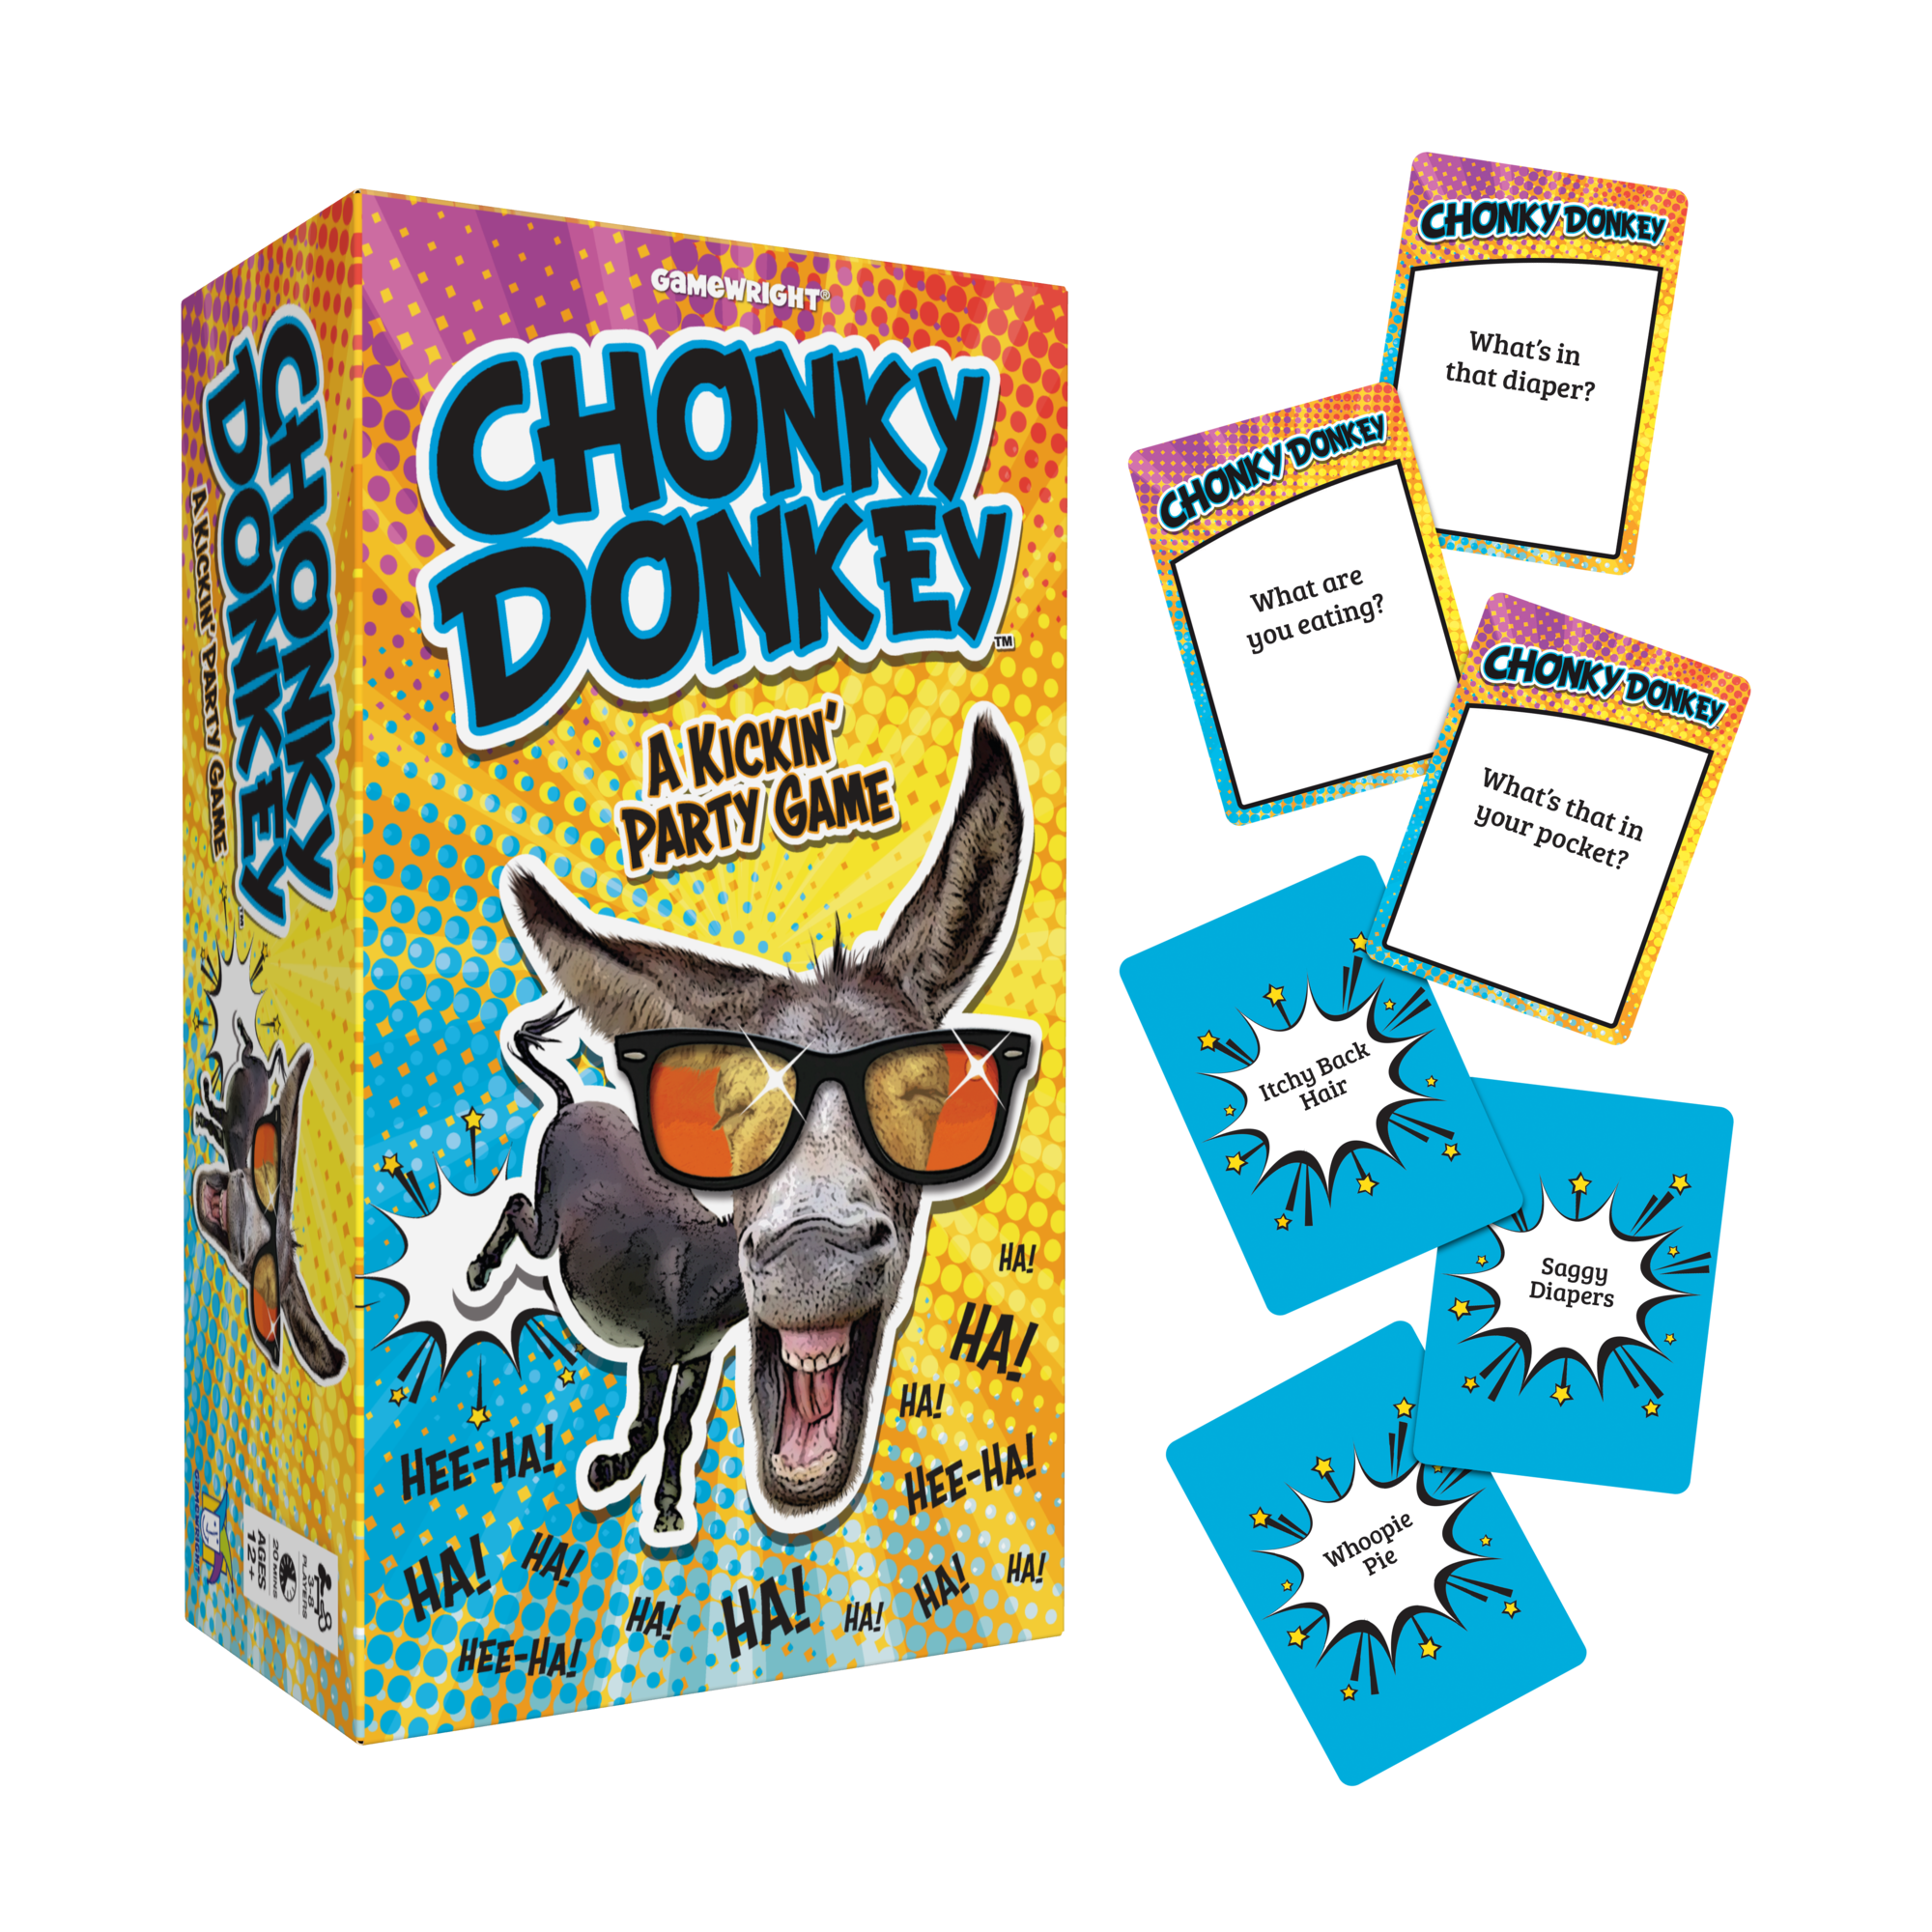 Chonky Donkey by Gamewright #7125